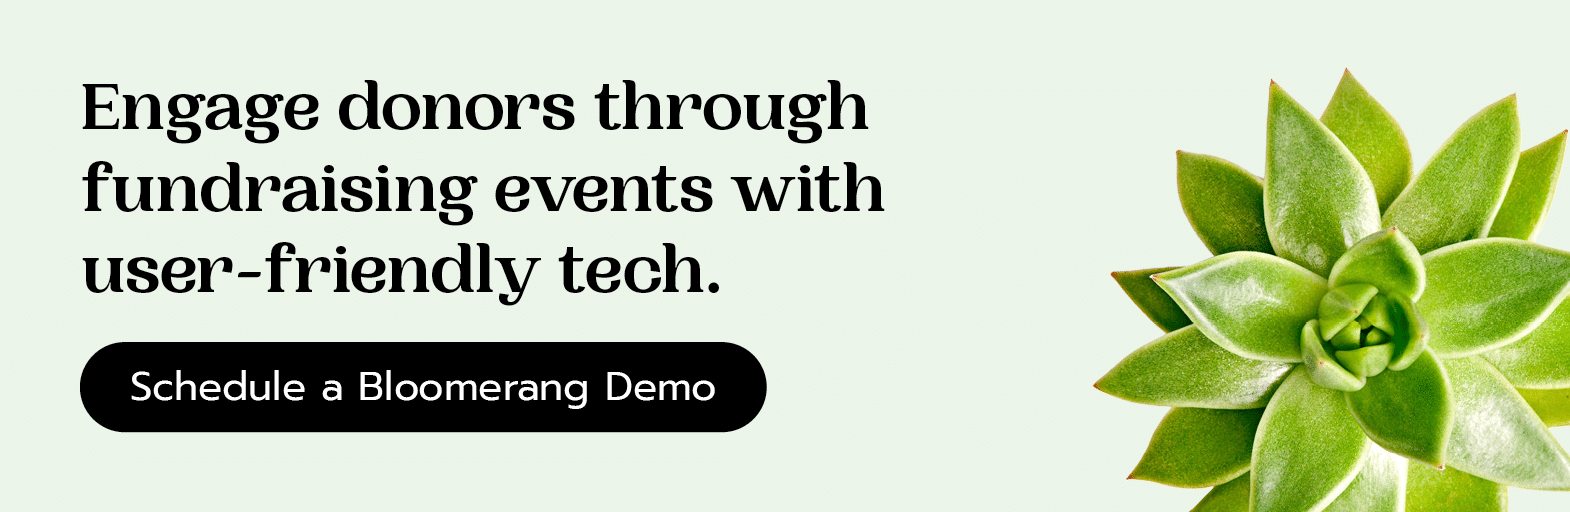 Engage donors through fundraising events with user-friendly tech. Schedule a Bloomerang Demo here. 